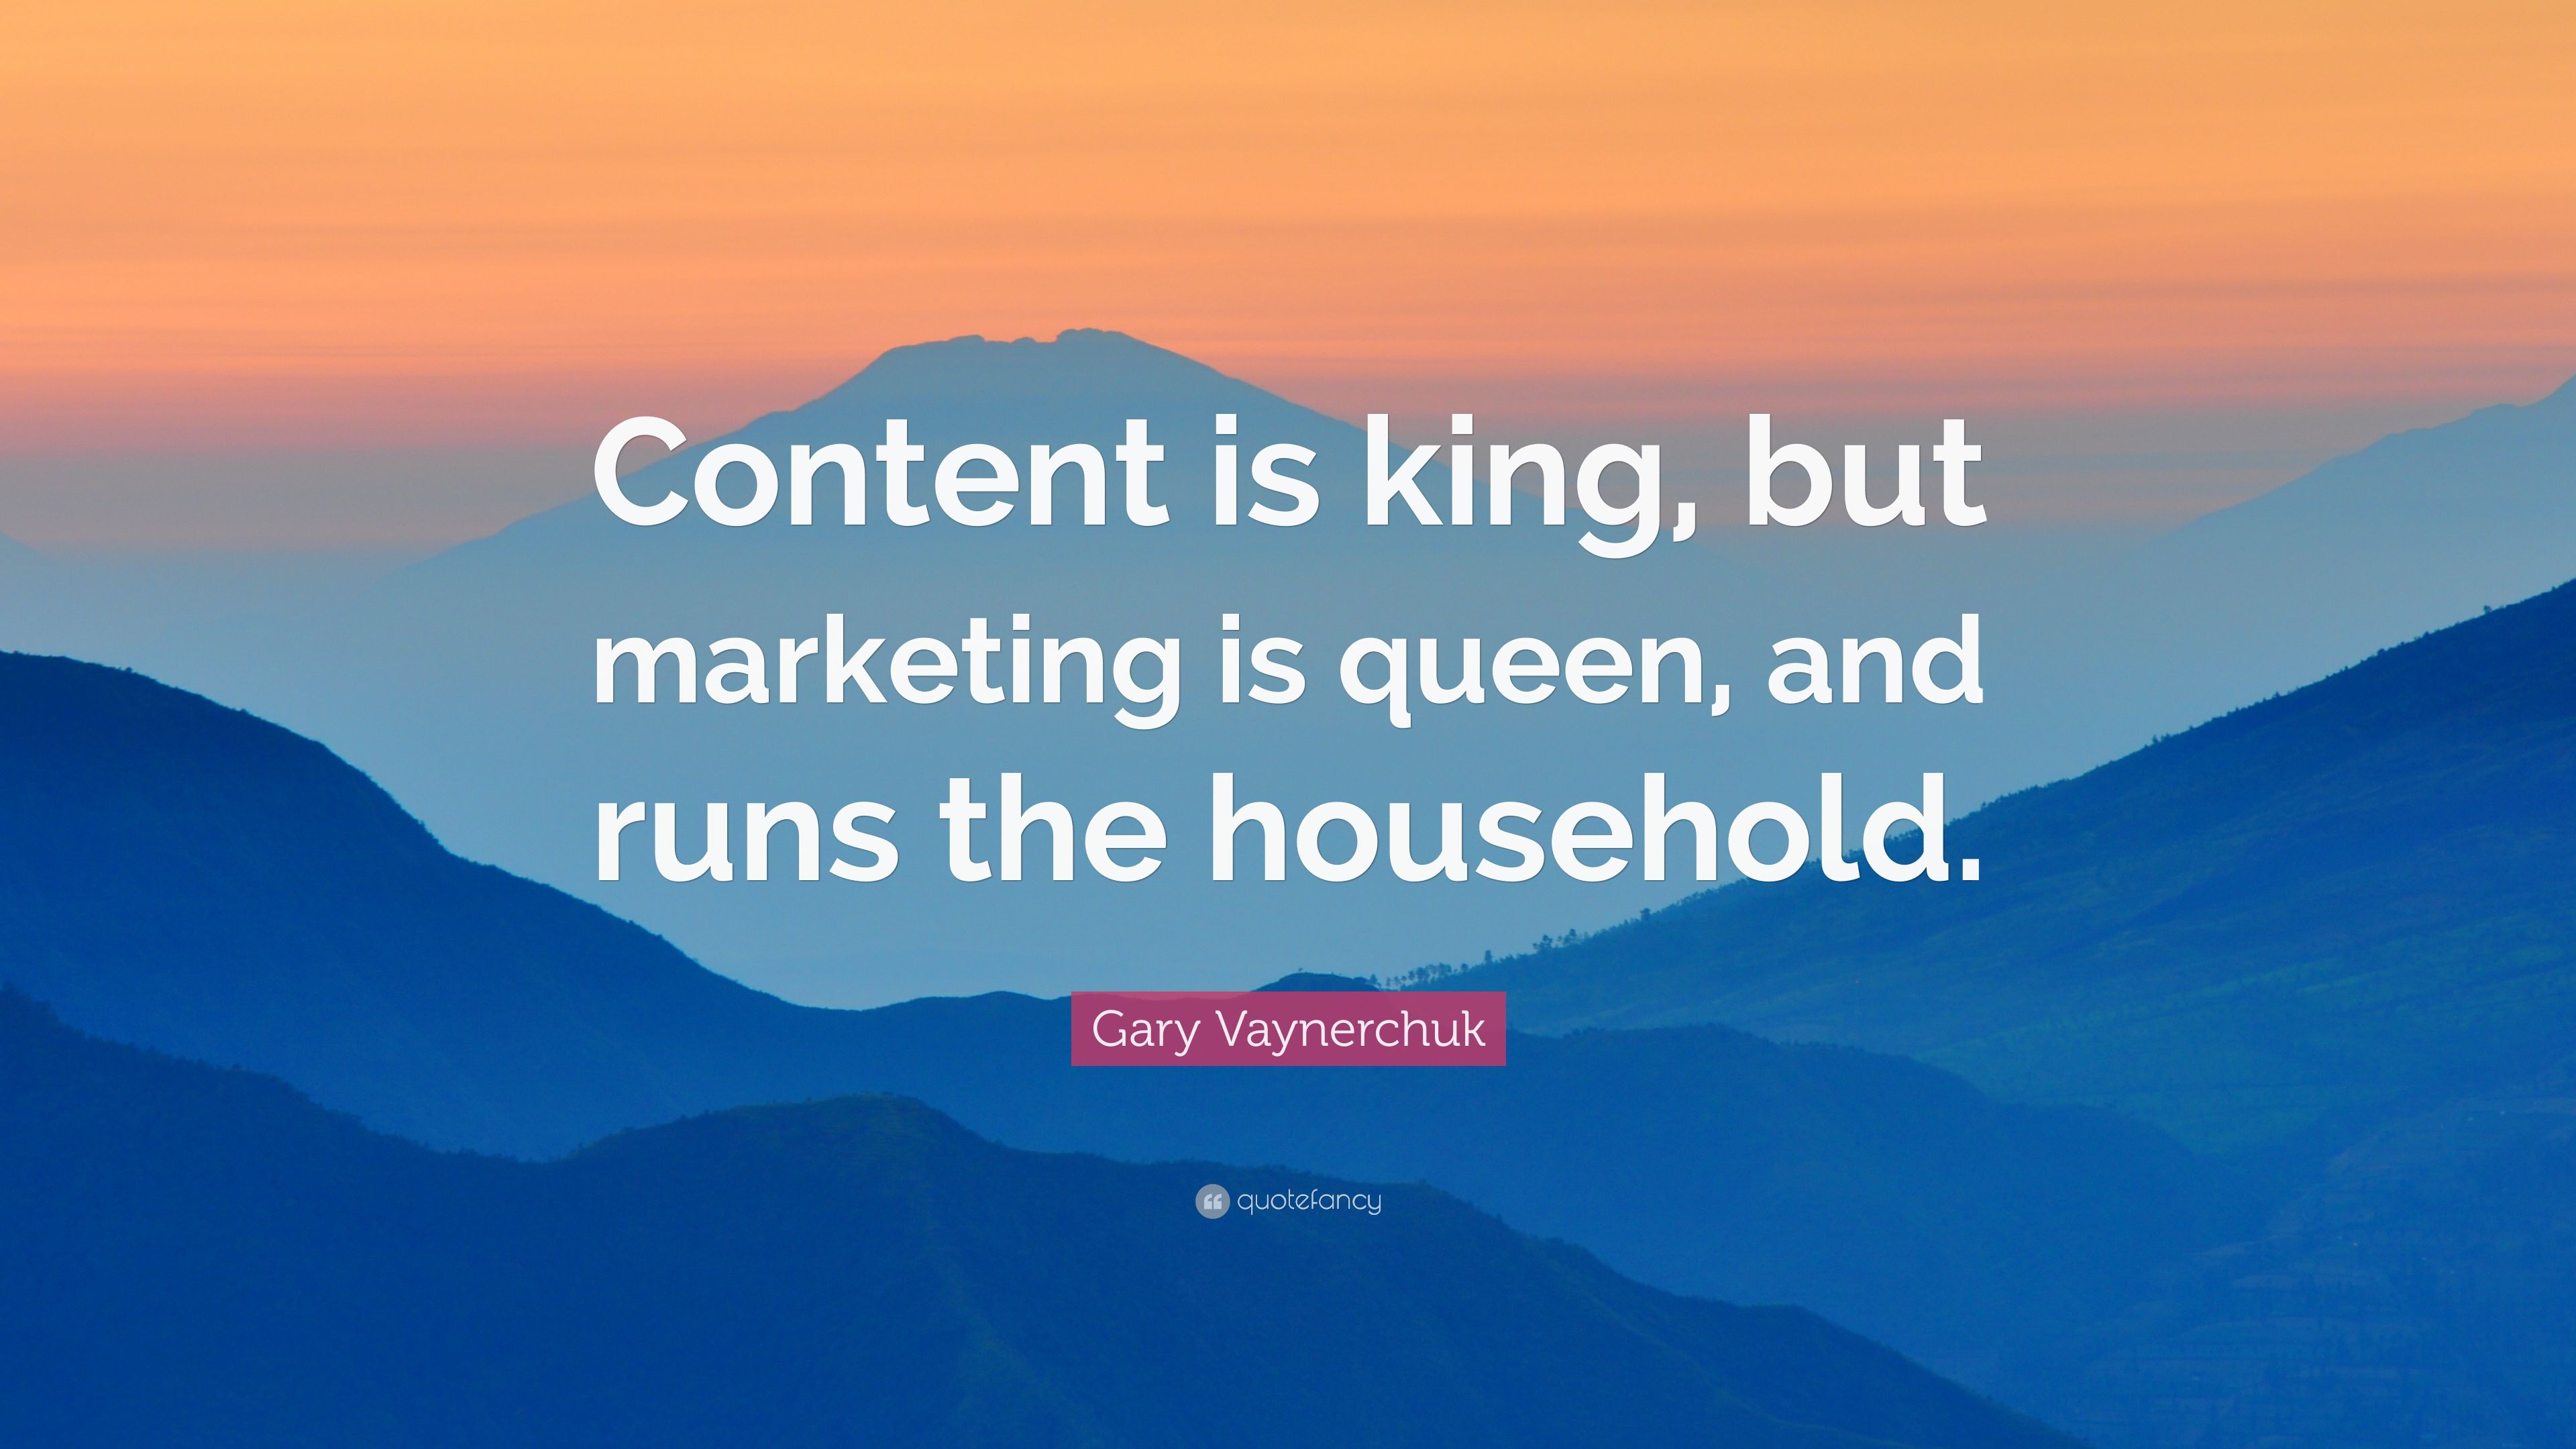 Gary Vaynerchuk Quote: “Content is king, but marketing is queen